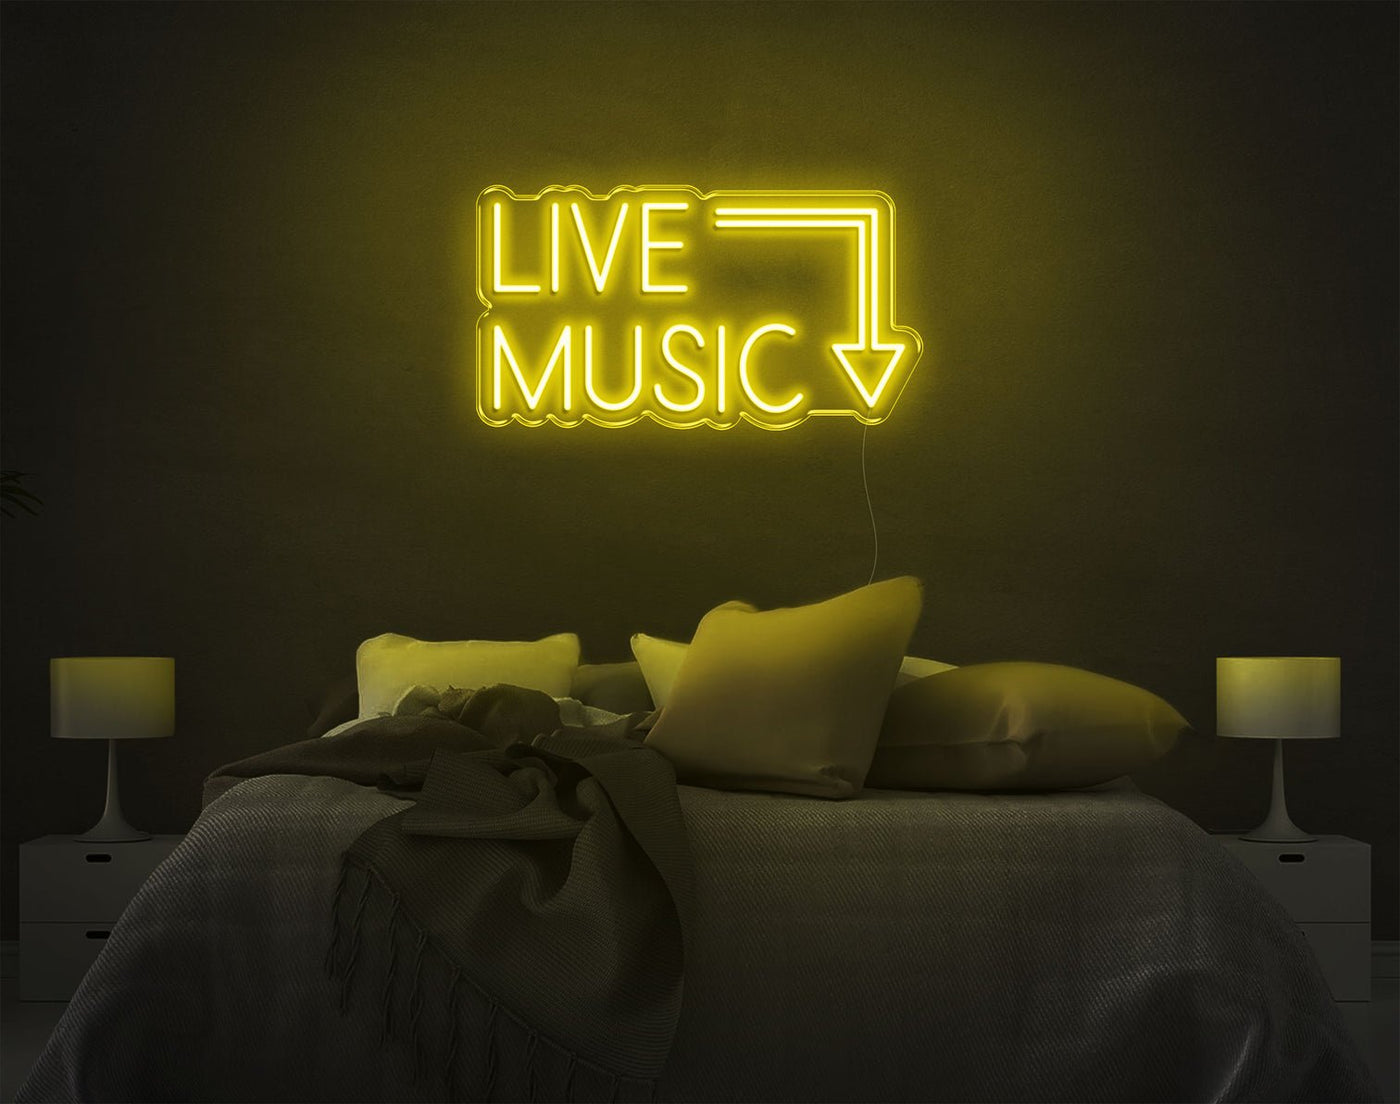 Live Music LED Neon Sign - 11inch x 21inchYellow